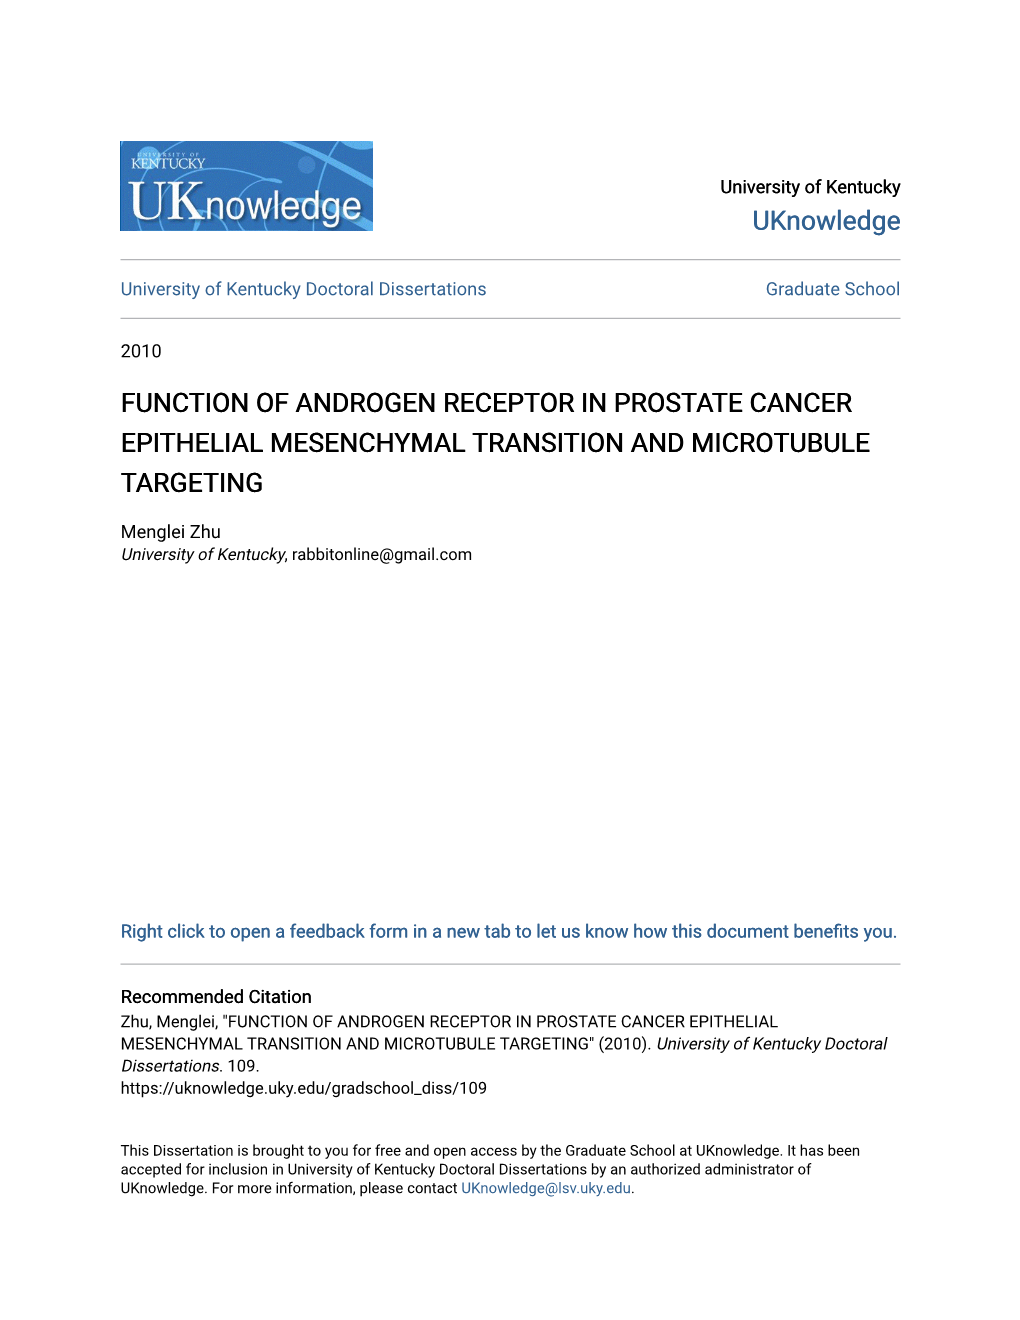 Function of Androgen Receptor in Prostate Cancer Epithelial Mesenchymal Transition and Microtubule Targeting